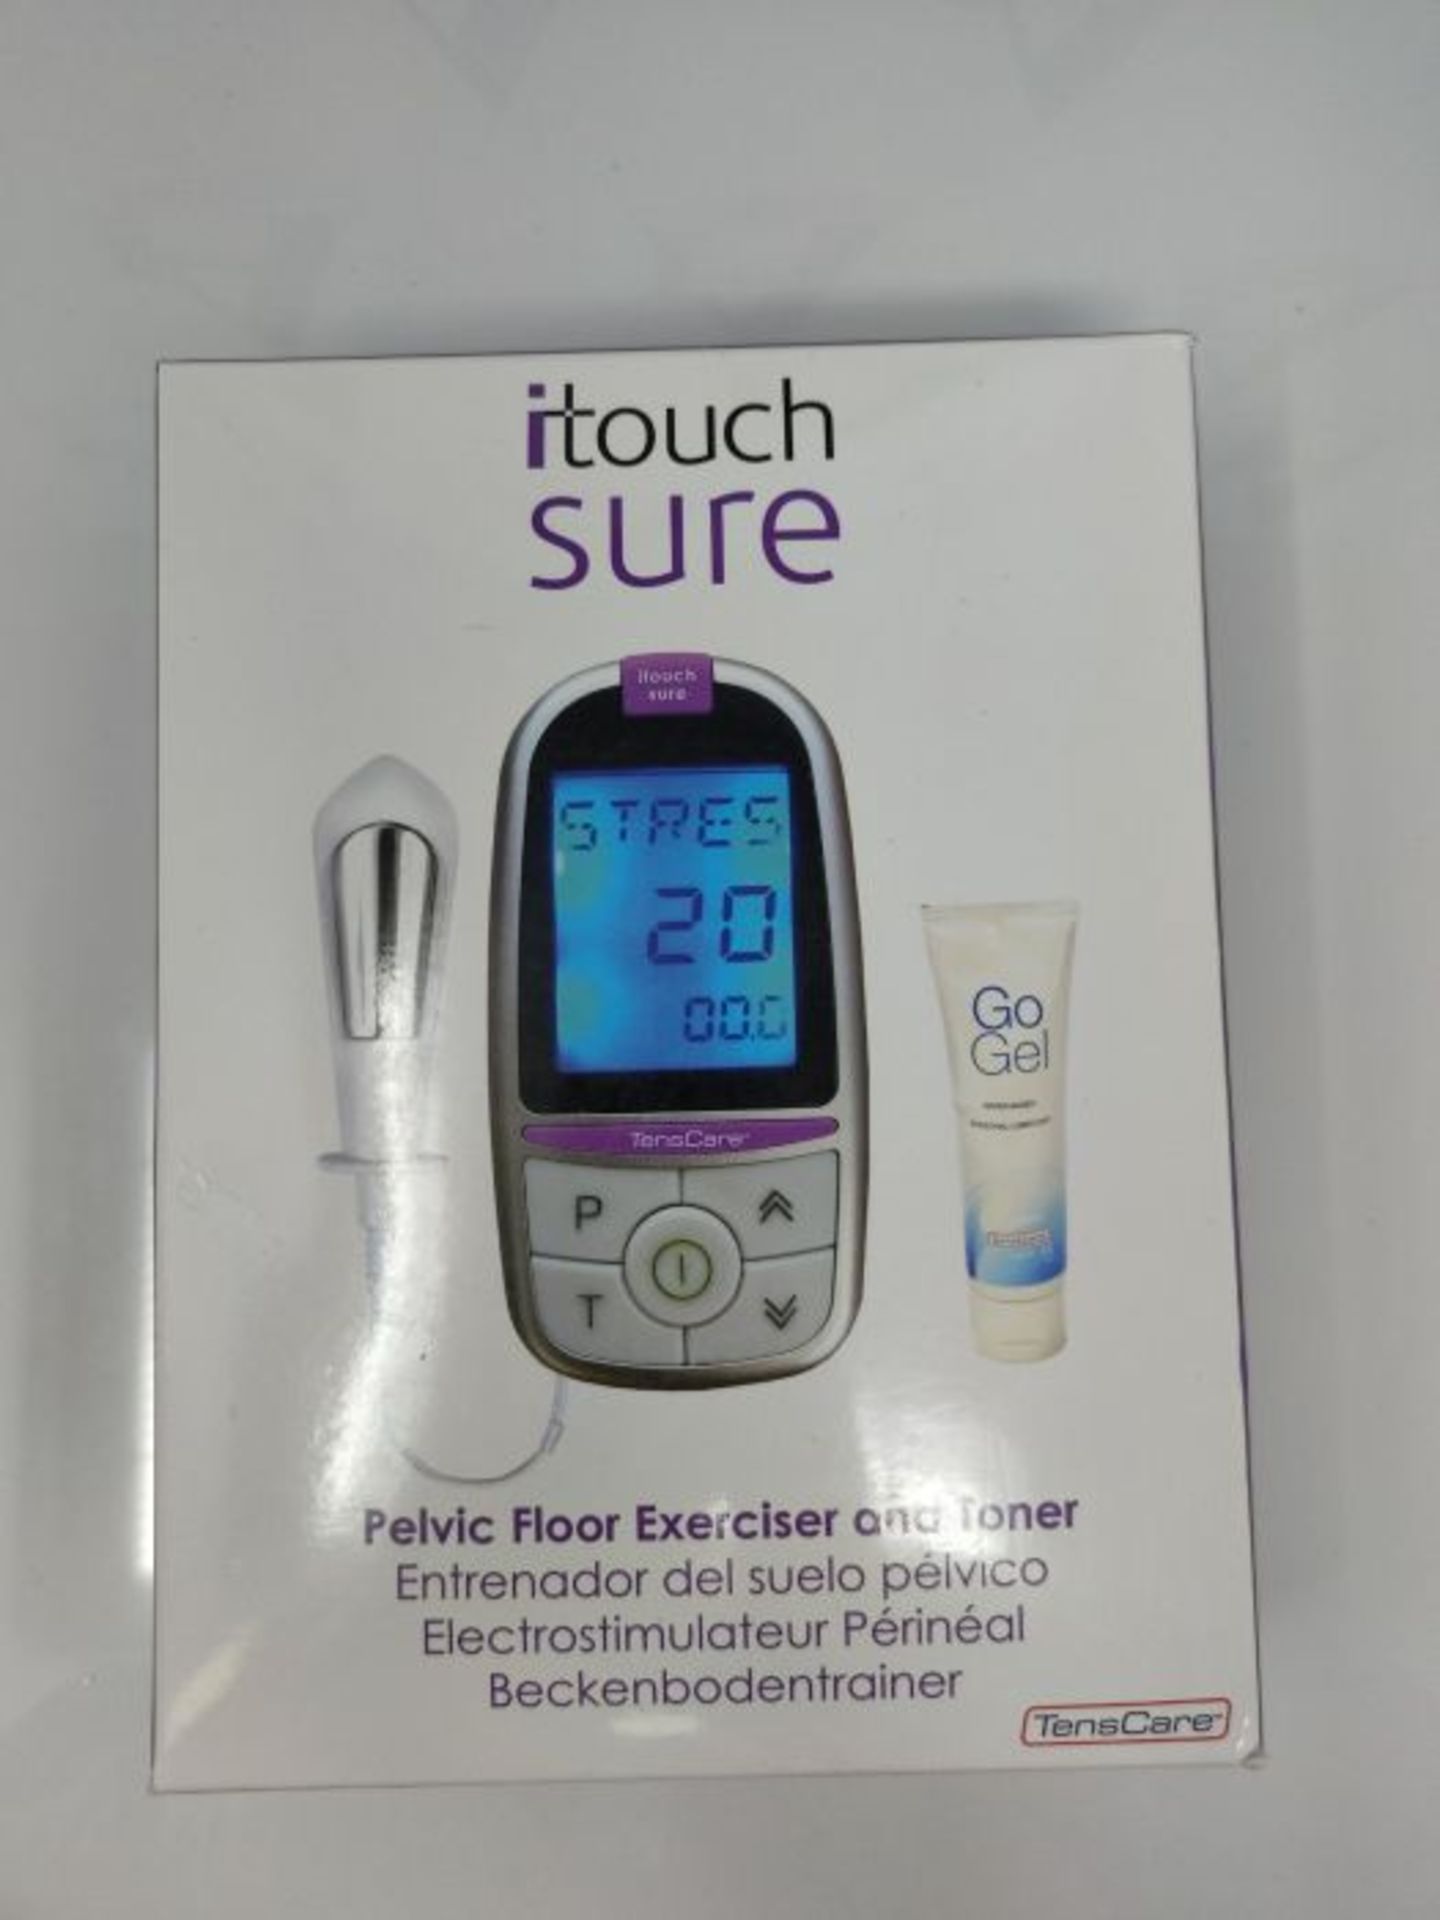 RRP £82.00 Tenscare itouch Sure Beckenbodentrainer fÃ¼r Frauen- Professioneller Beckenbodentrai - Image 2 of 3